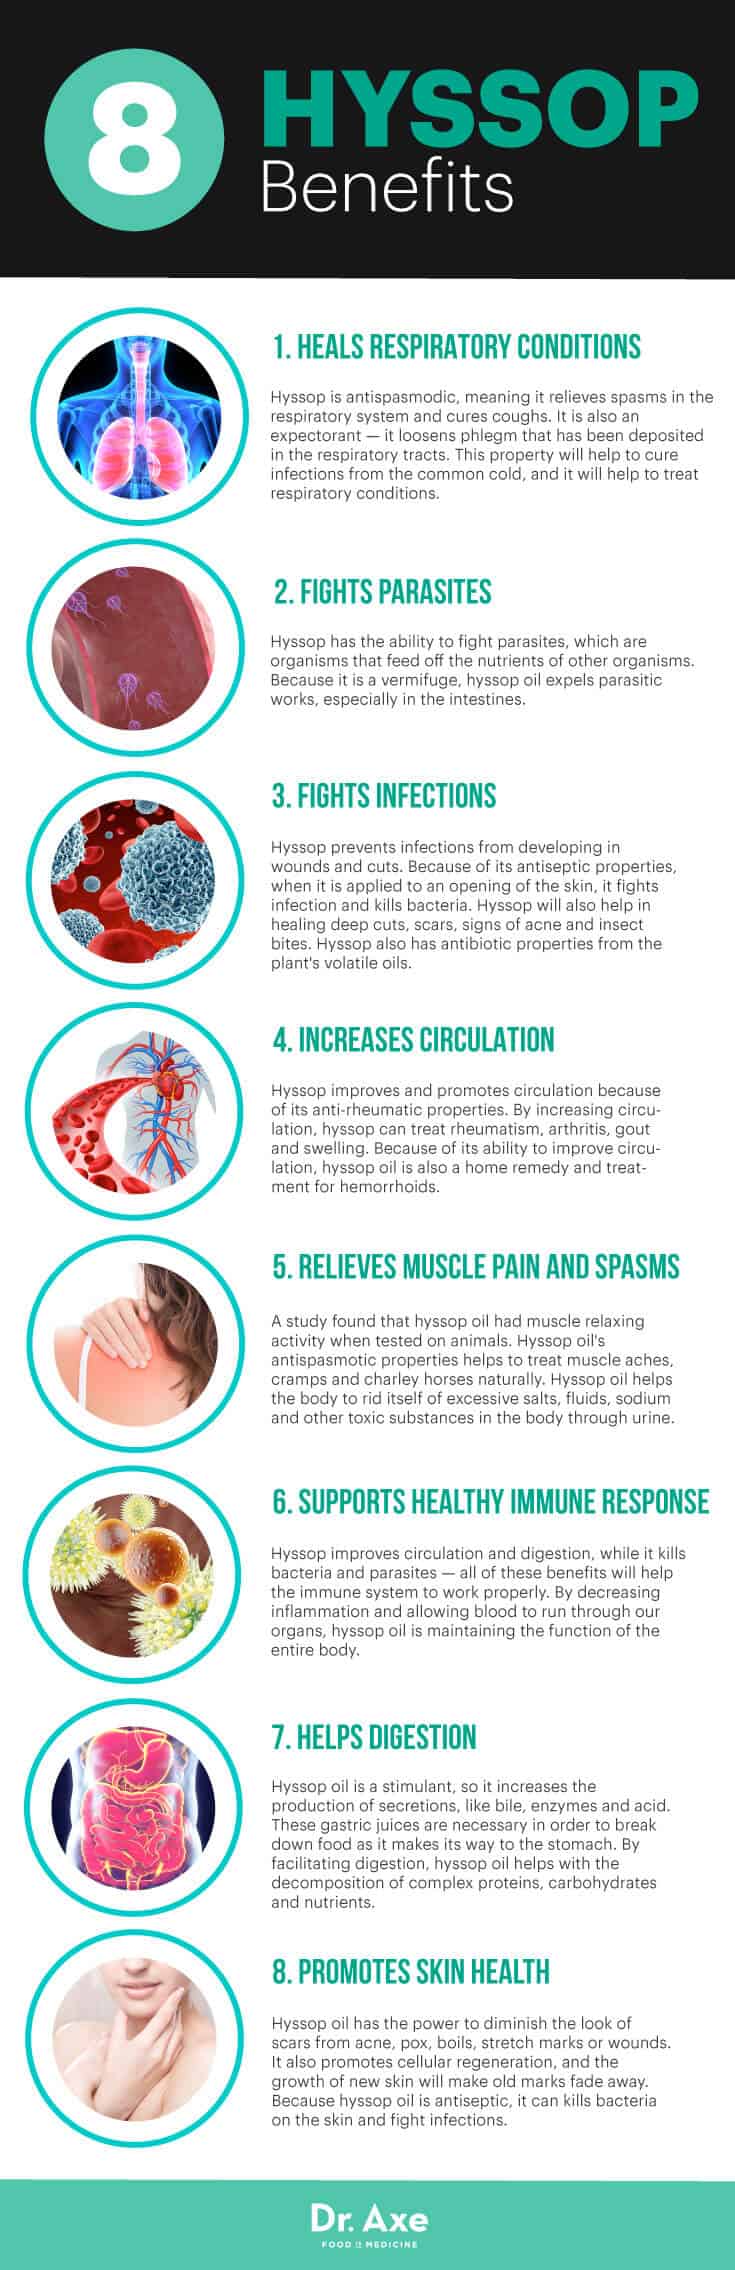 Hyssop benefits infographic - Dr. Axe